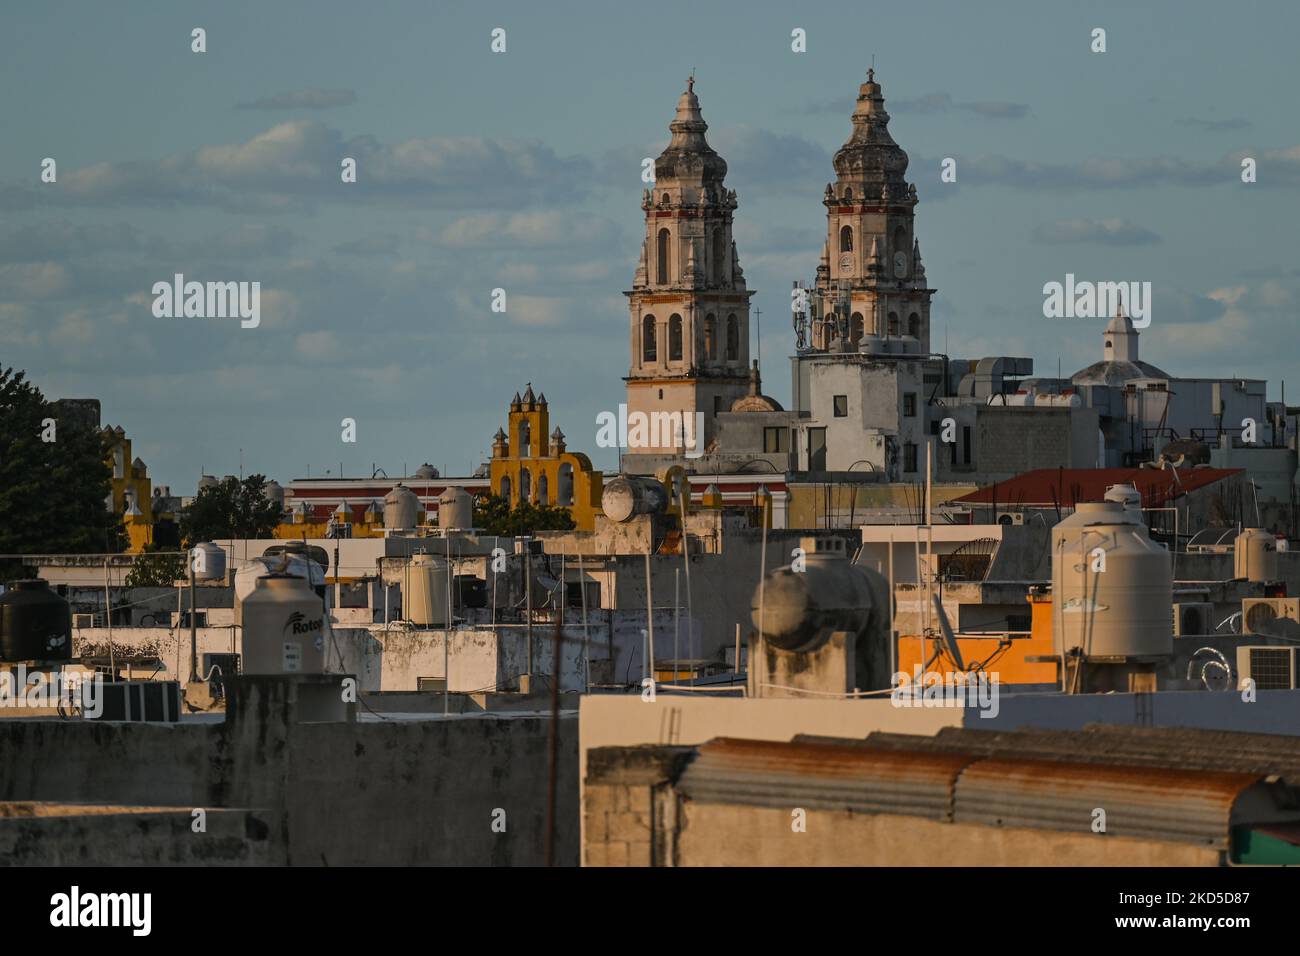 View of the historical center of Campeche with the Our Lady of the Immaculate Conception Cathedral, Campeche (Parroquia de nuestra Señora de la Inmaculada Concepción Santa Iglesia Catedral). On Friday, March 17, 2022, in San Francisco de Campeche, Campeche, Mexico. (Photo by Artur Widak/NurPhoto) Stock Photo